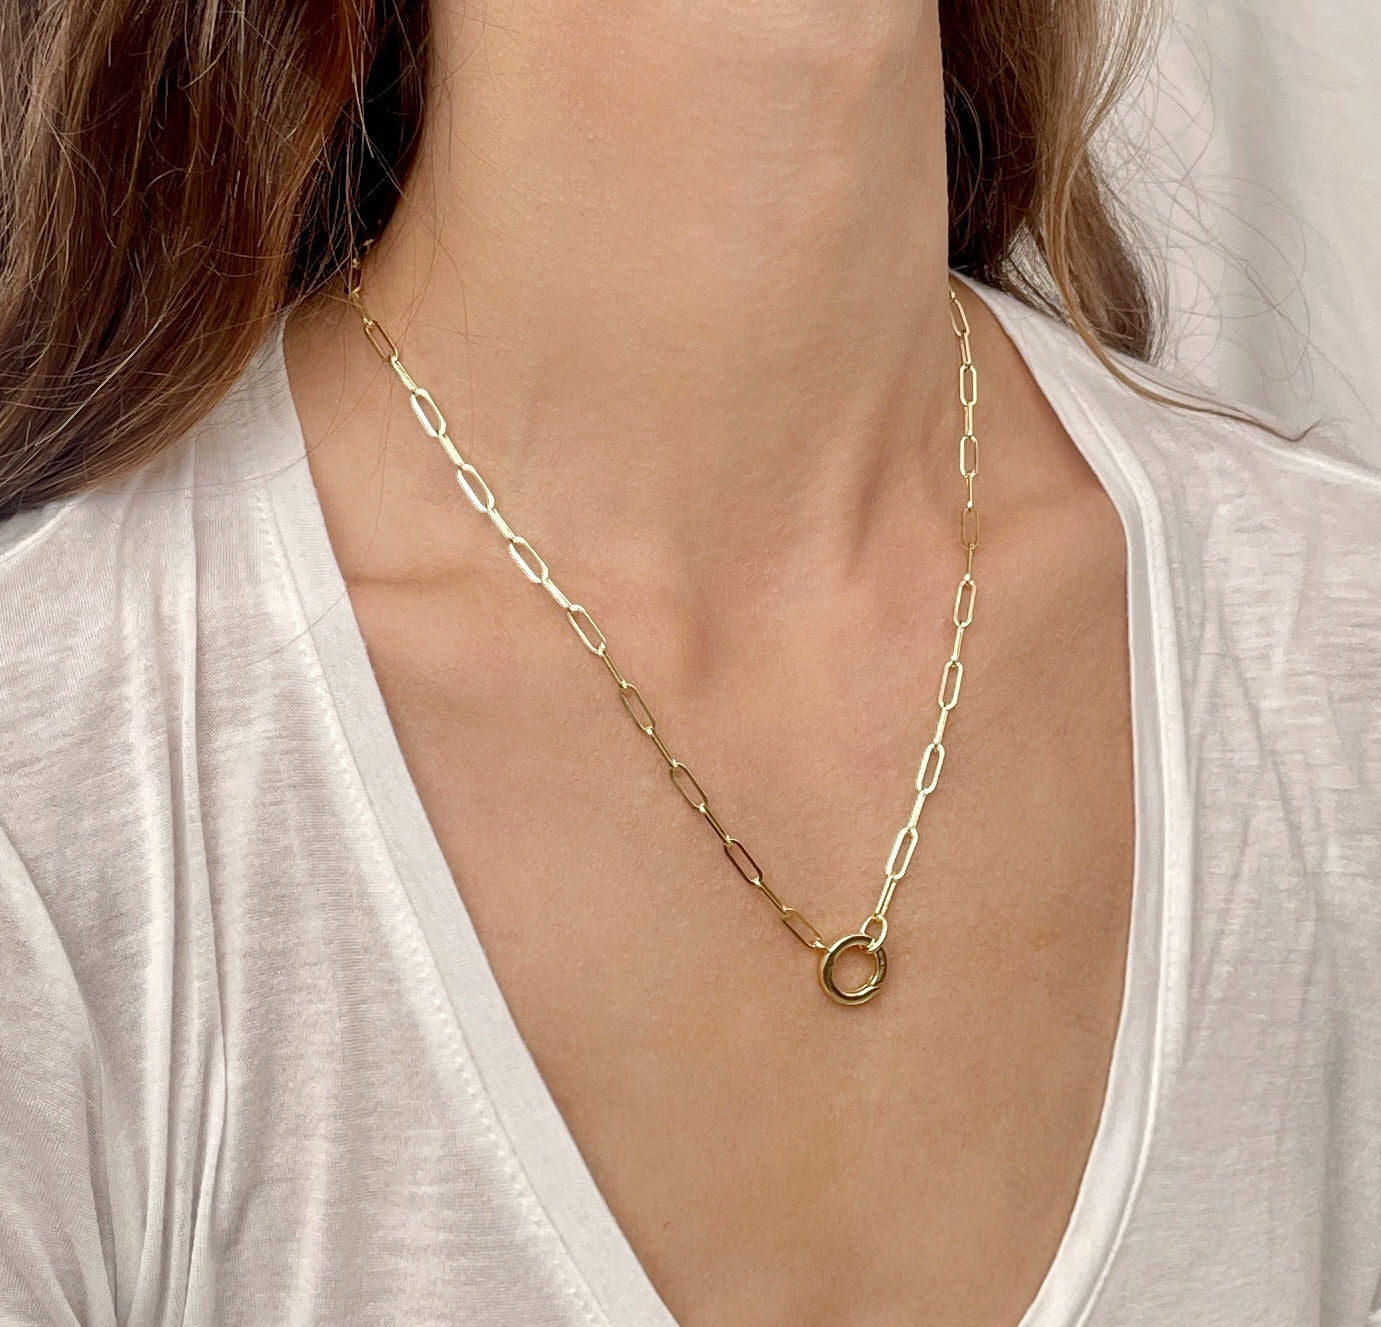 14k yellow gold charm holder paperclip necklace